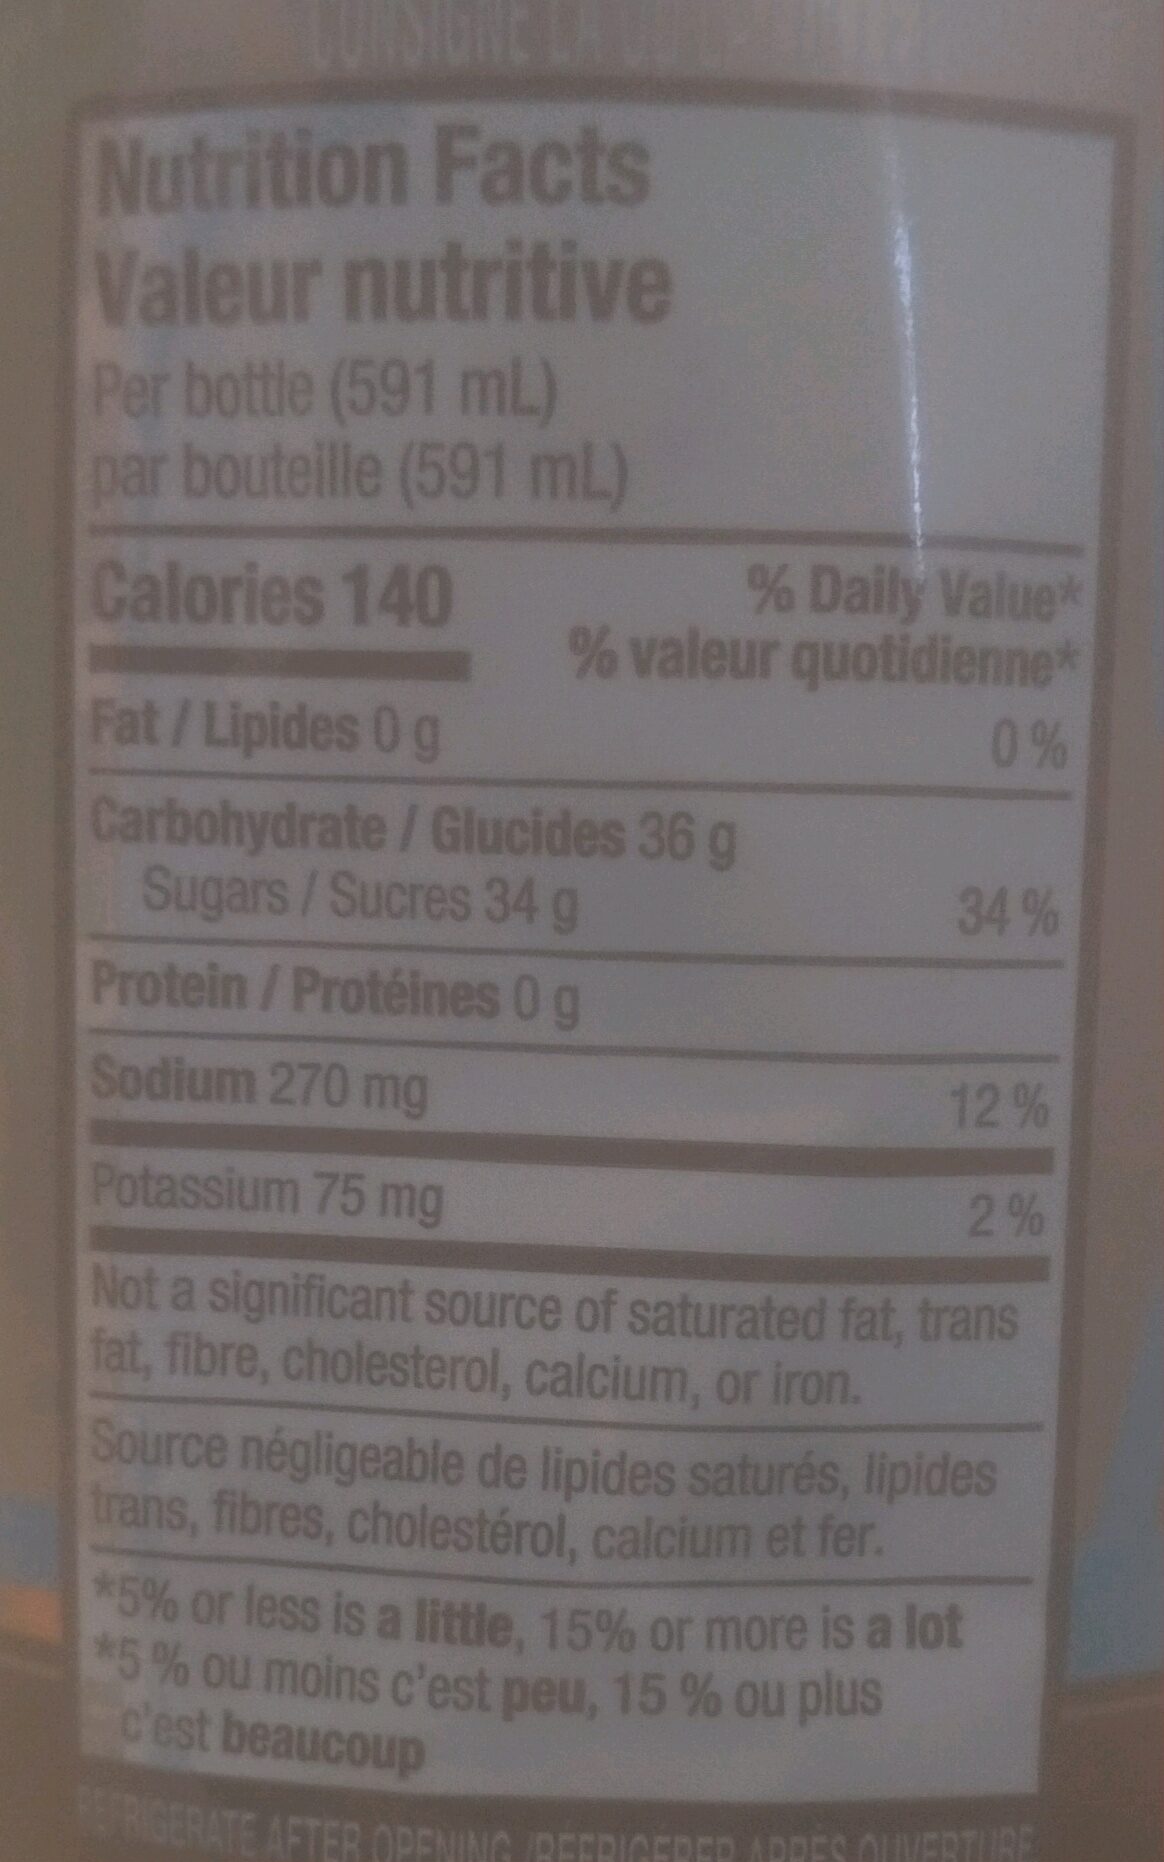 Cool Blue G - Nutrition facts